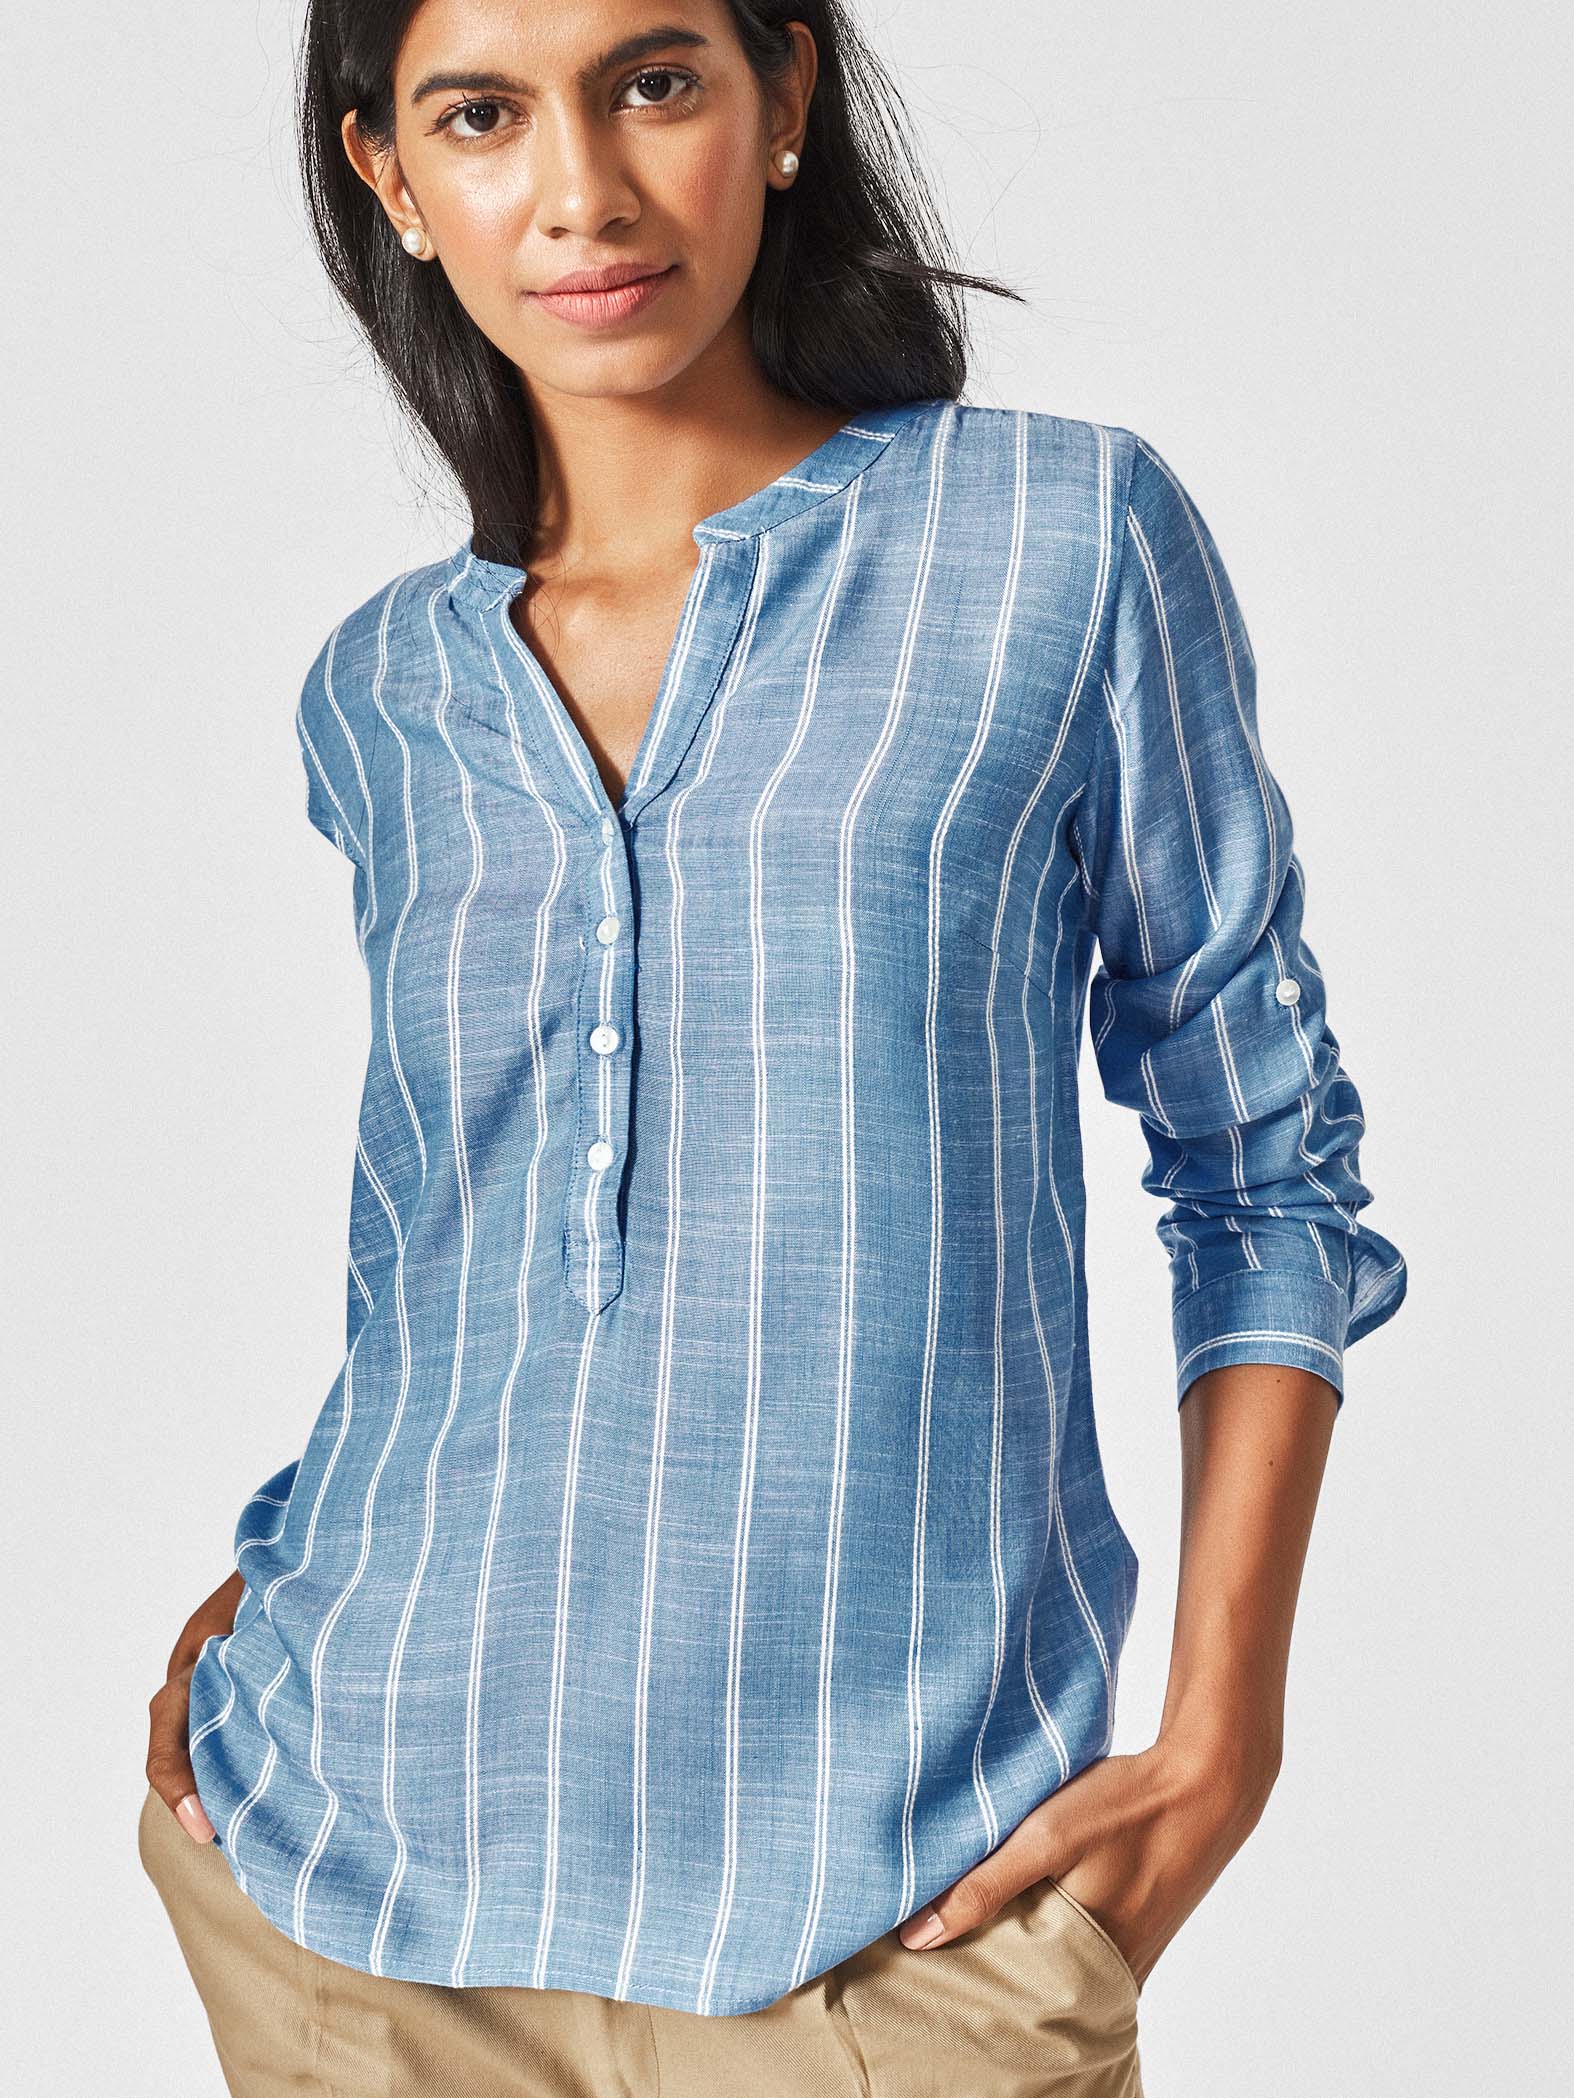 Azure Embroidered Stripe Top